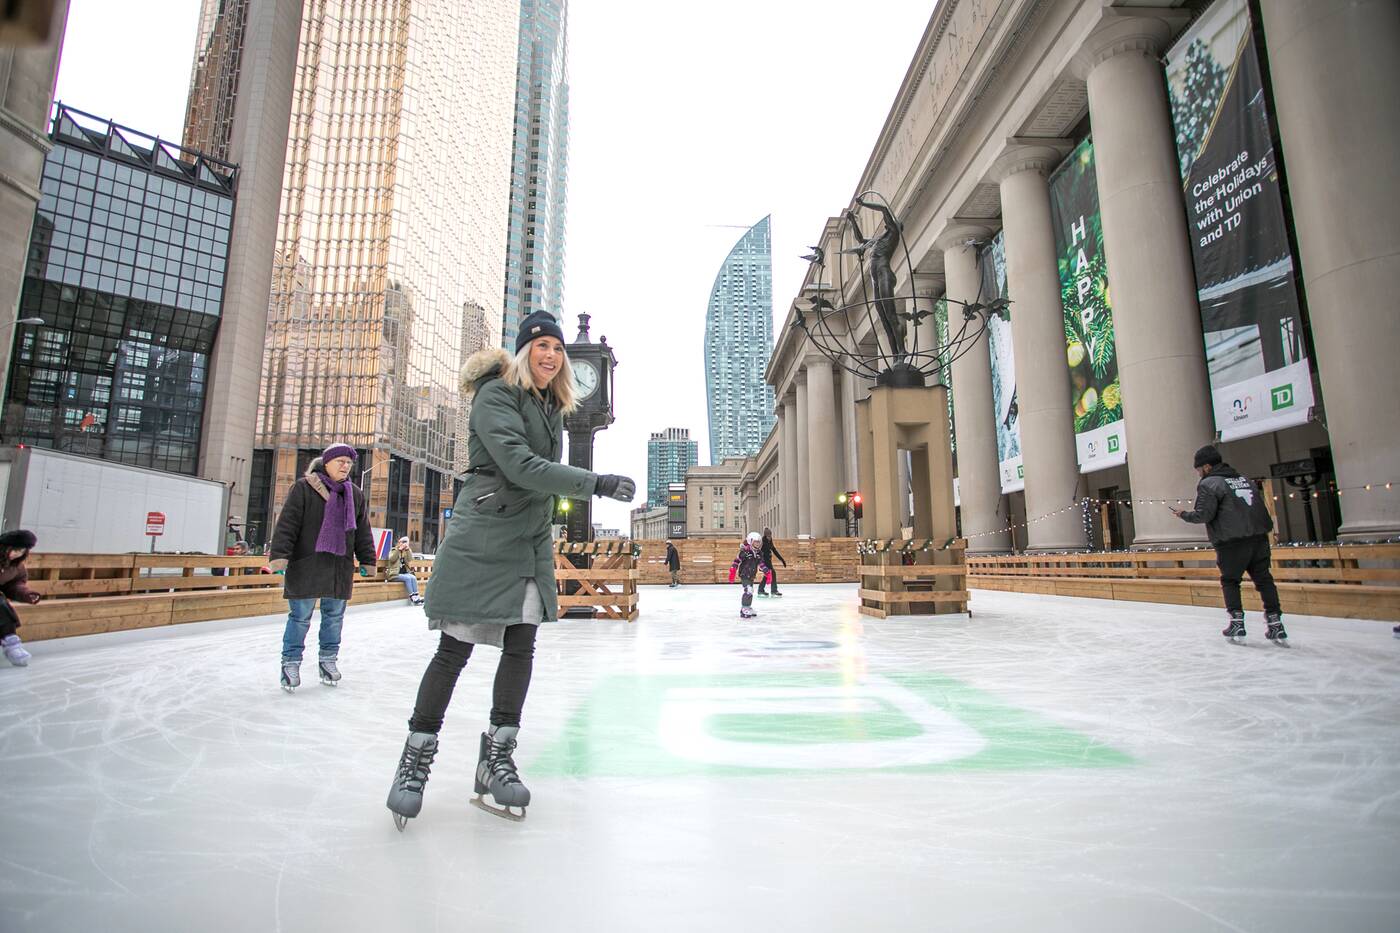 Toronto's newest outdoor skating rink is now officially open at Union